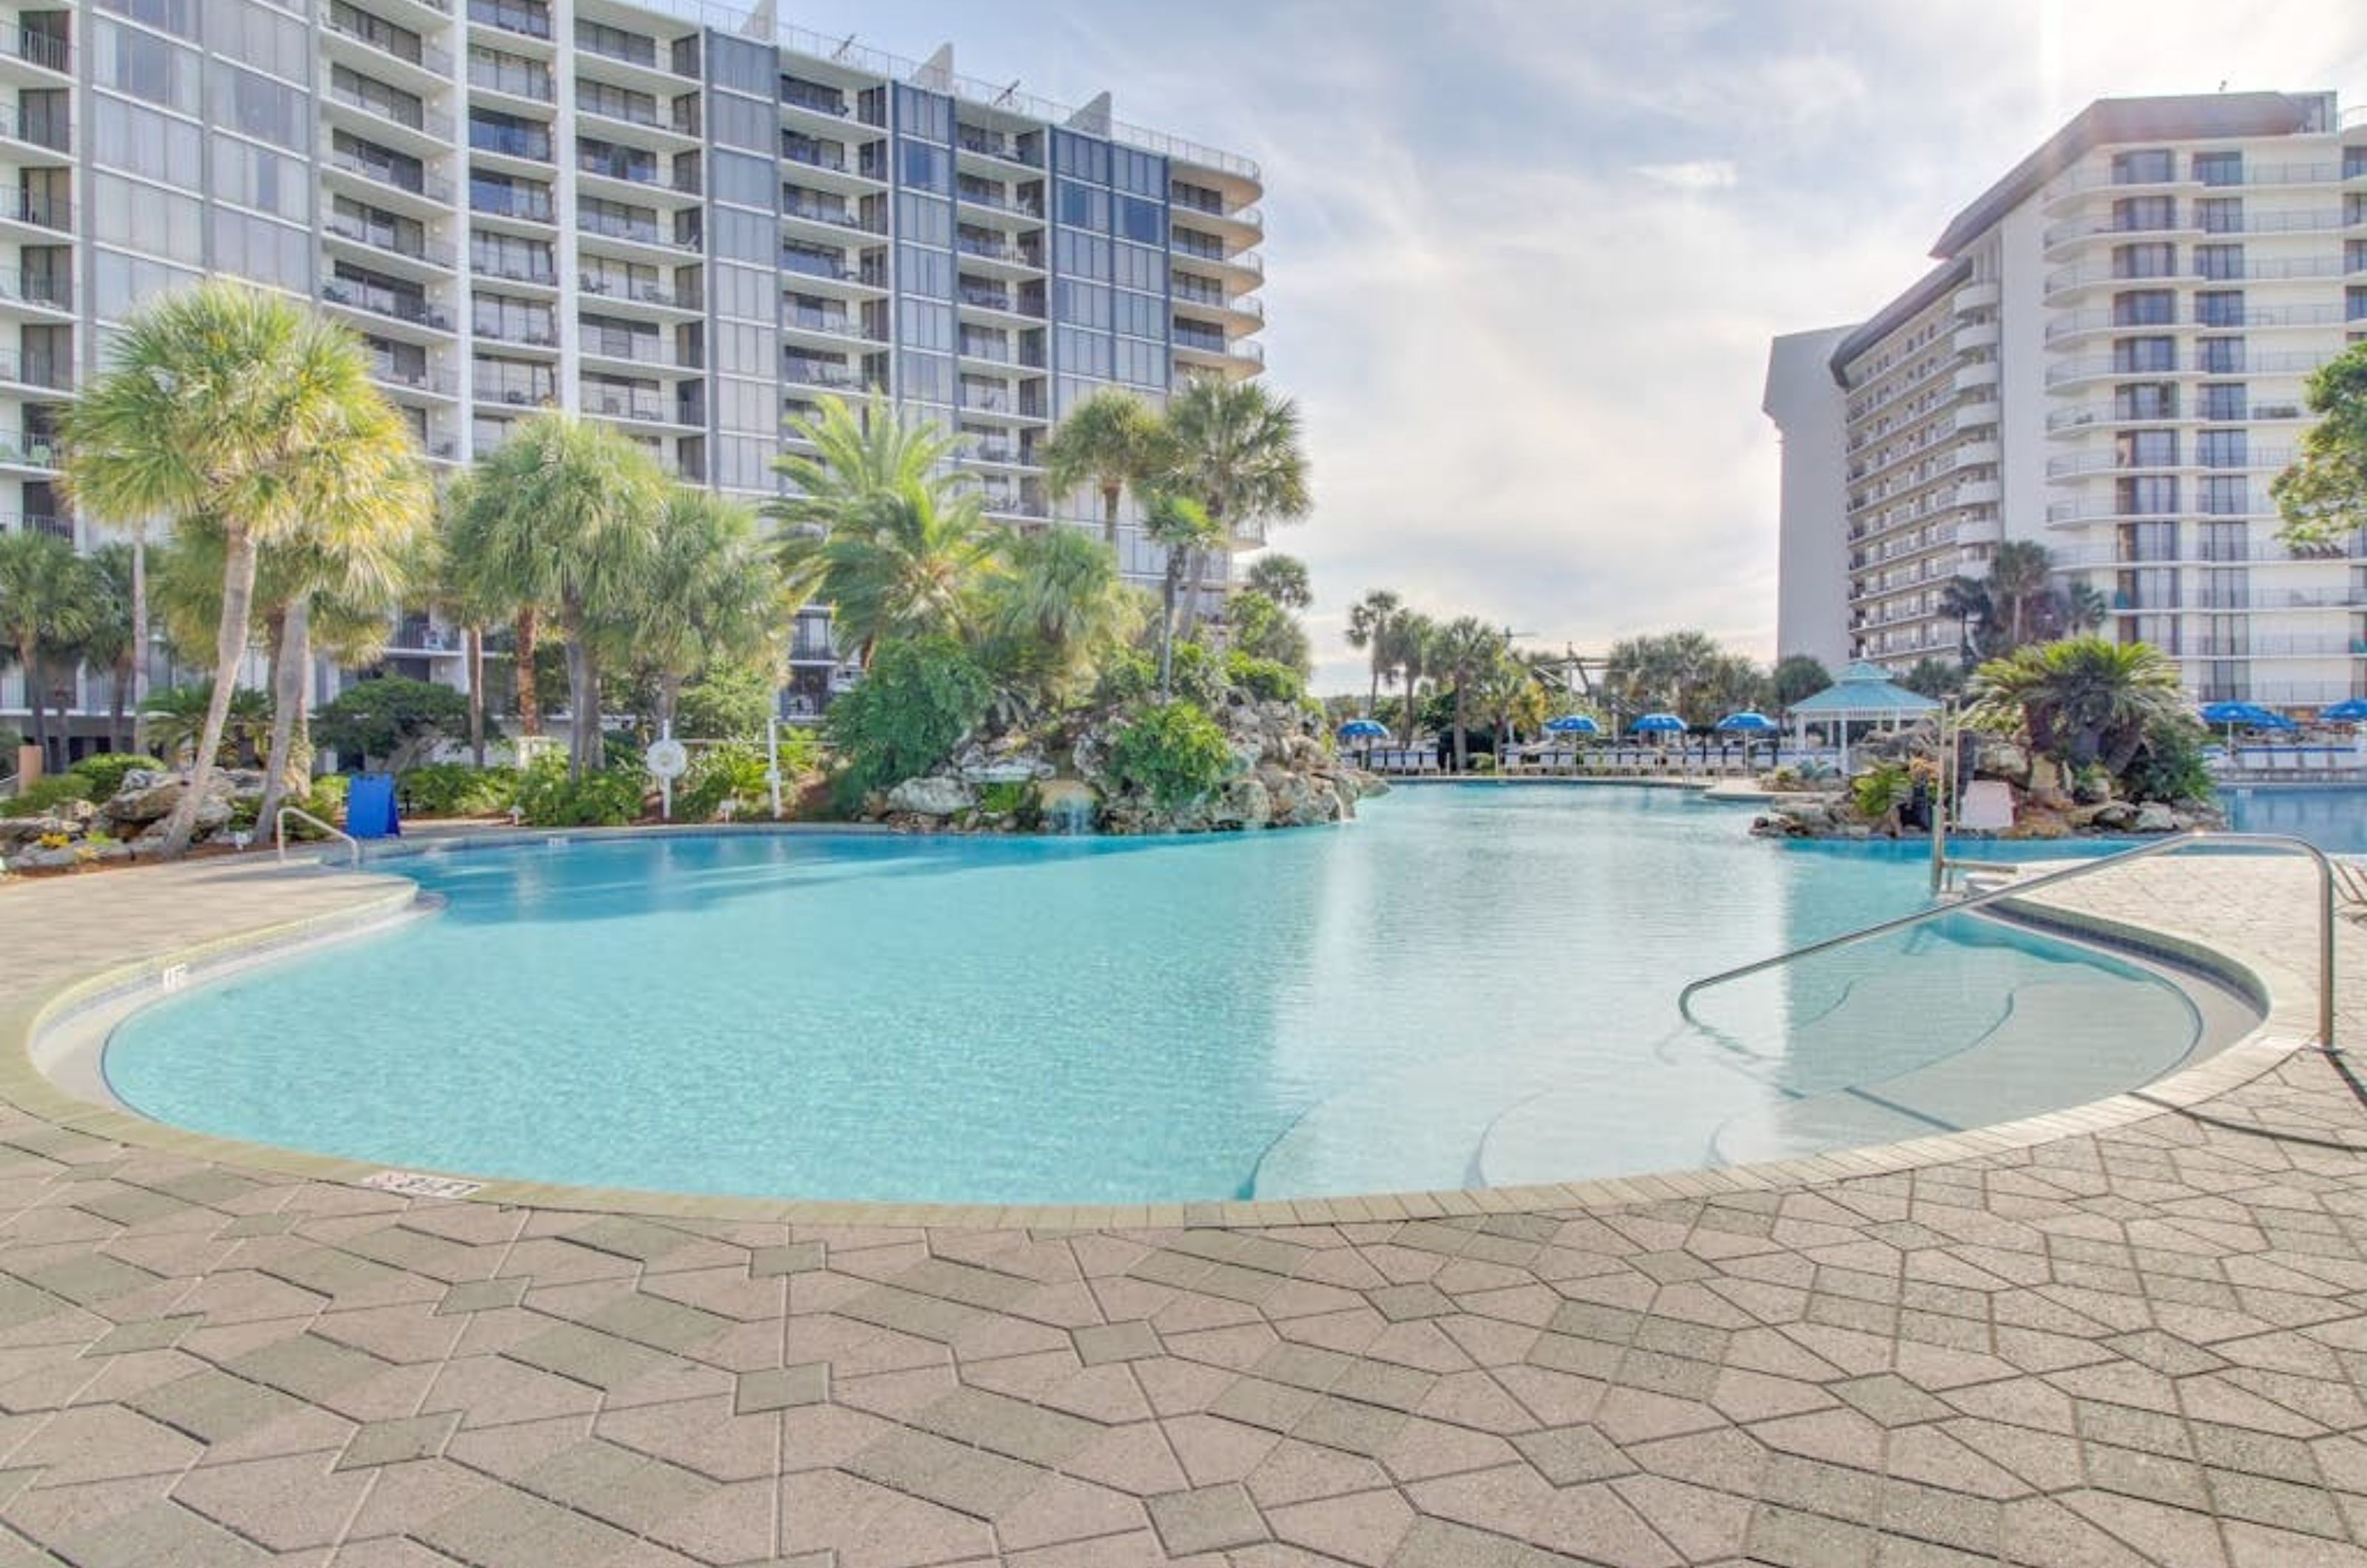 The outdoor swimming pool in front of the condos at Edgewater Beach and Golf Resort in Panama City Beach Florida	